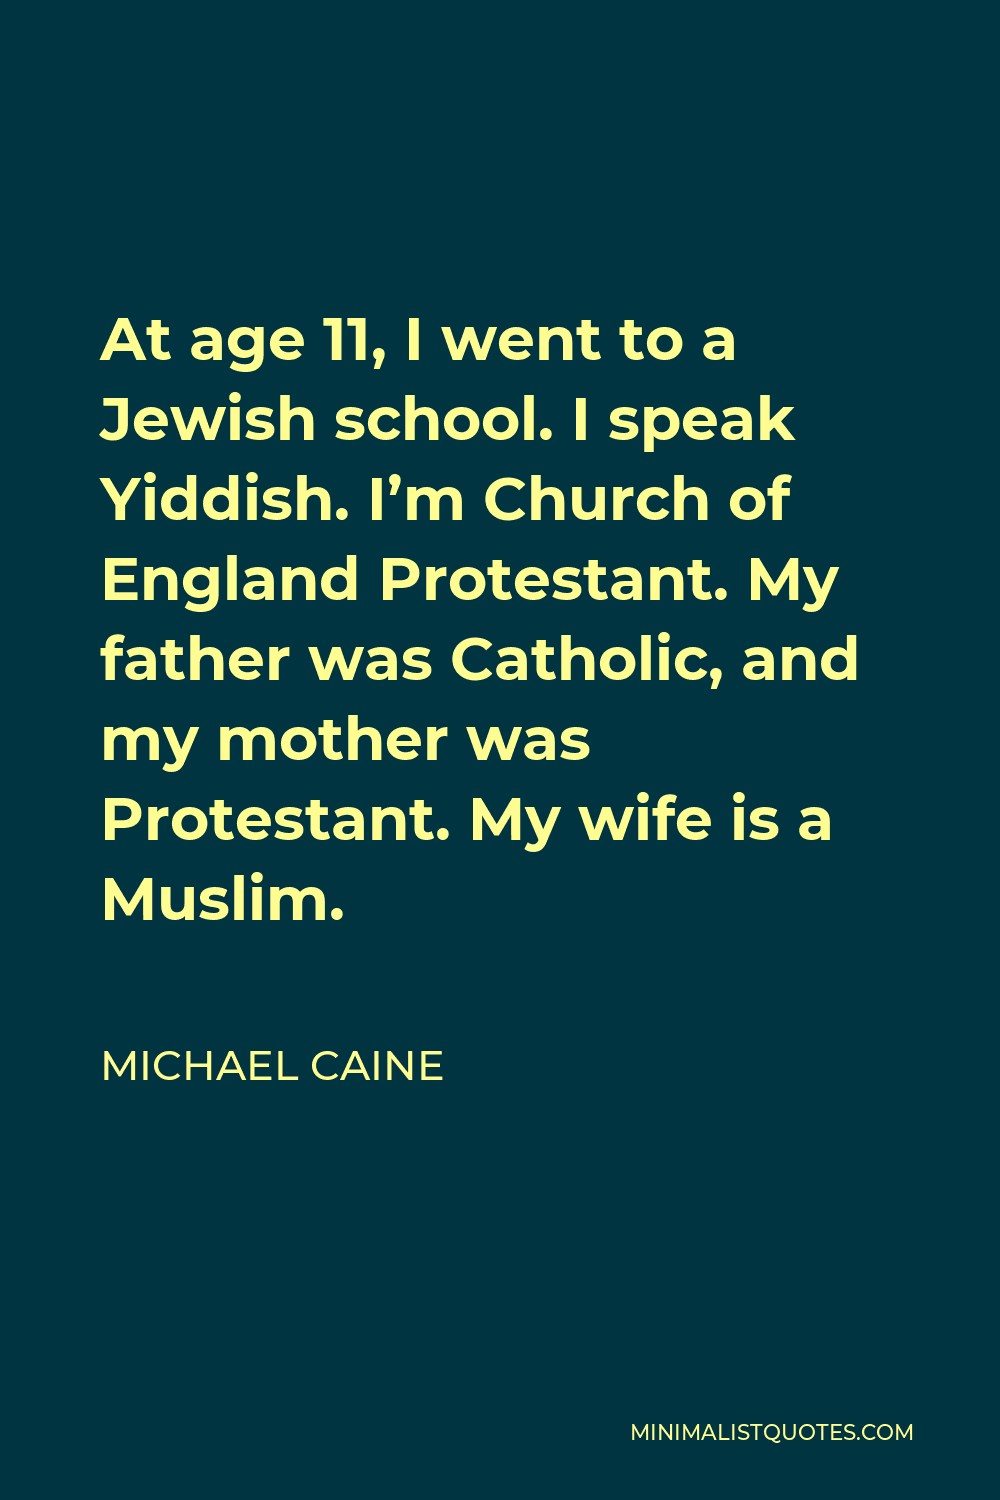 Michael Caine Quote - At age 11, I went to a Jewish school. I speak Yiddish. I’m Church of England Protestant. My father was Catholic, and my mother was Protestant. My wife is a Muslim.